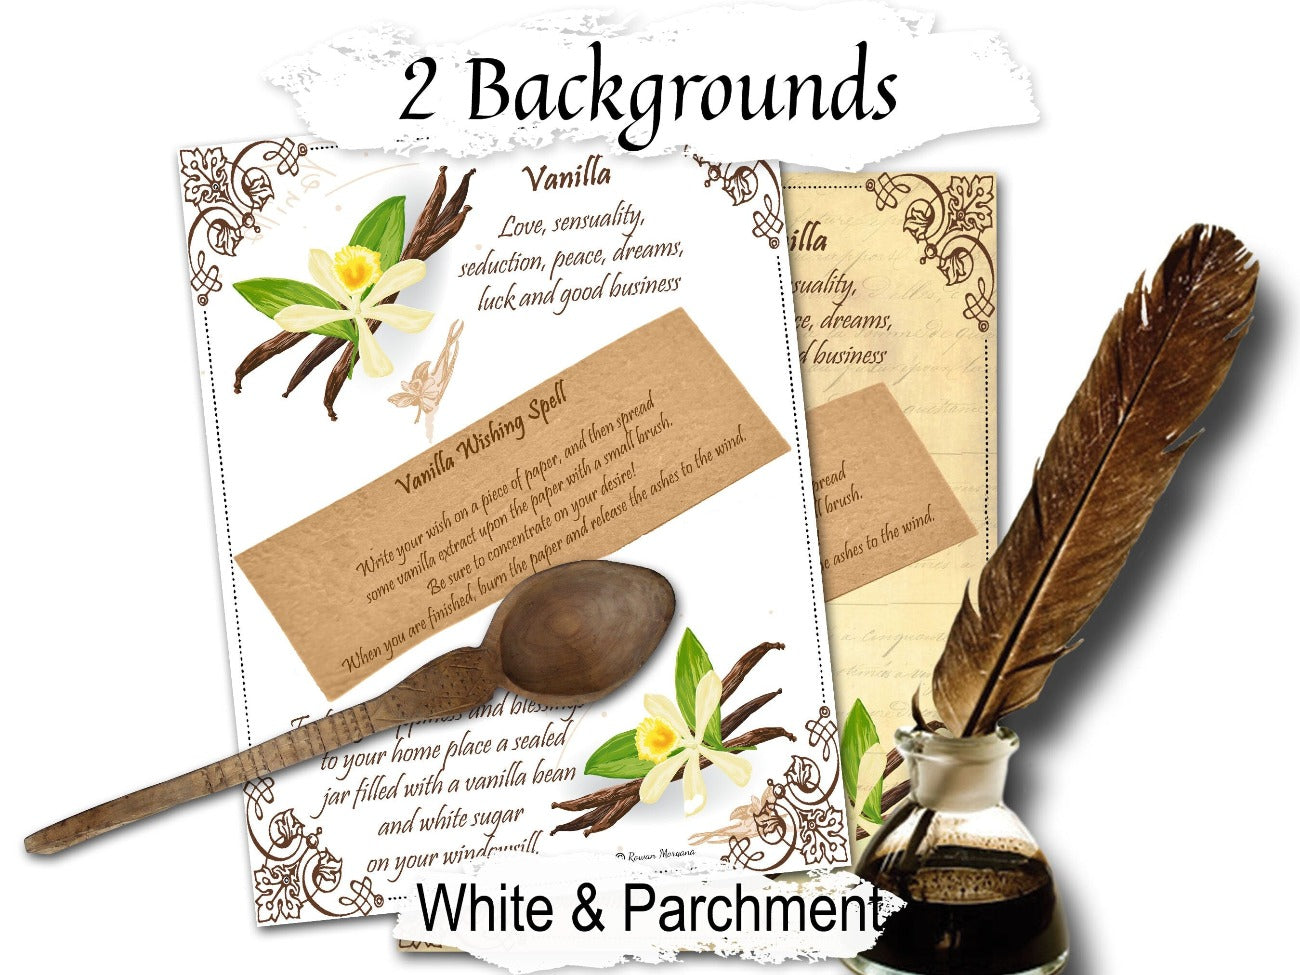 VANILLA WISHING SPELL, Kitchen Witch Magic, Cottage Witchcraft, Make a Wish, Dream Come True, Wicca Herb Apothecary, Green Witch Garden - Morgana Magick Spell